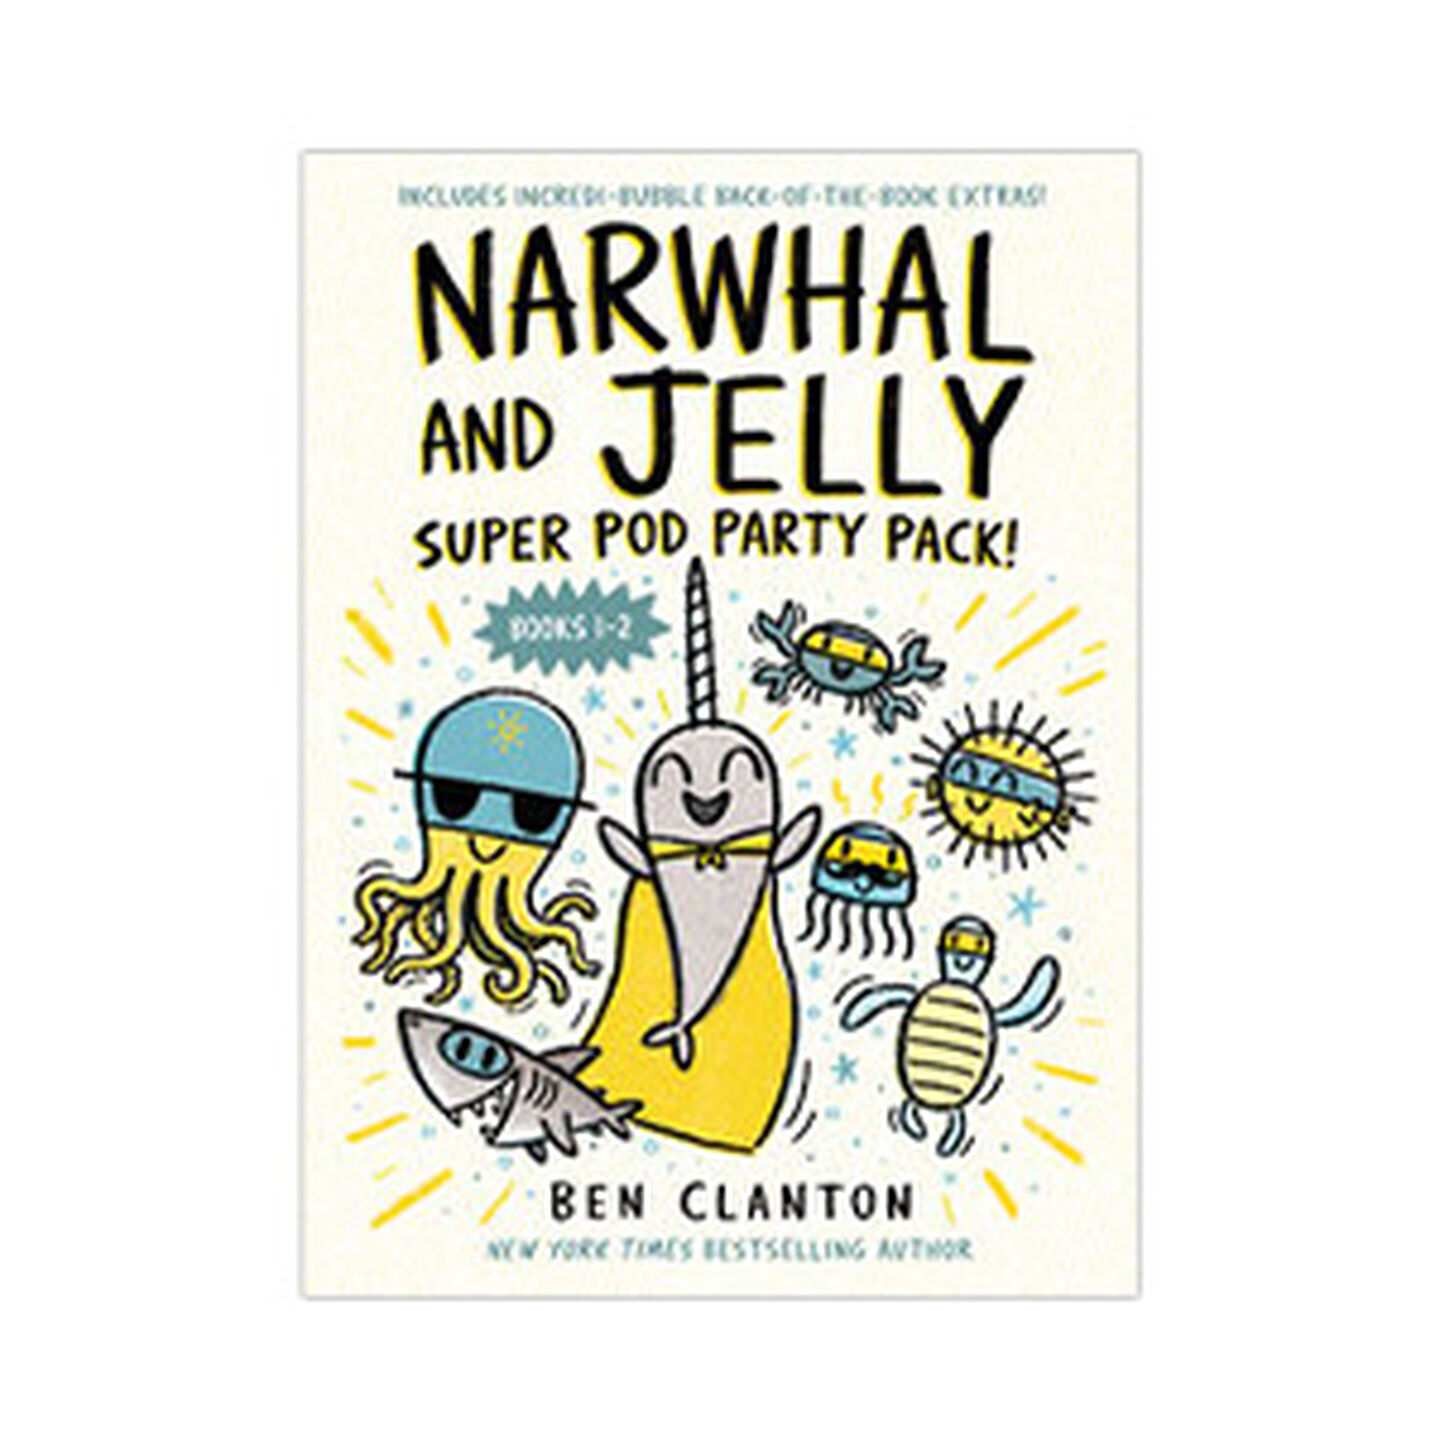 Narwhal and Jelly Super Pod Party Pack!